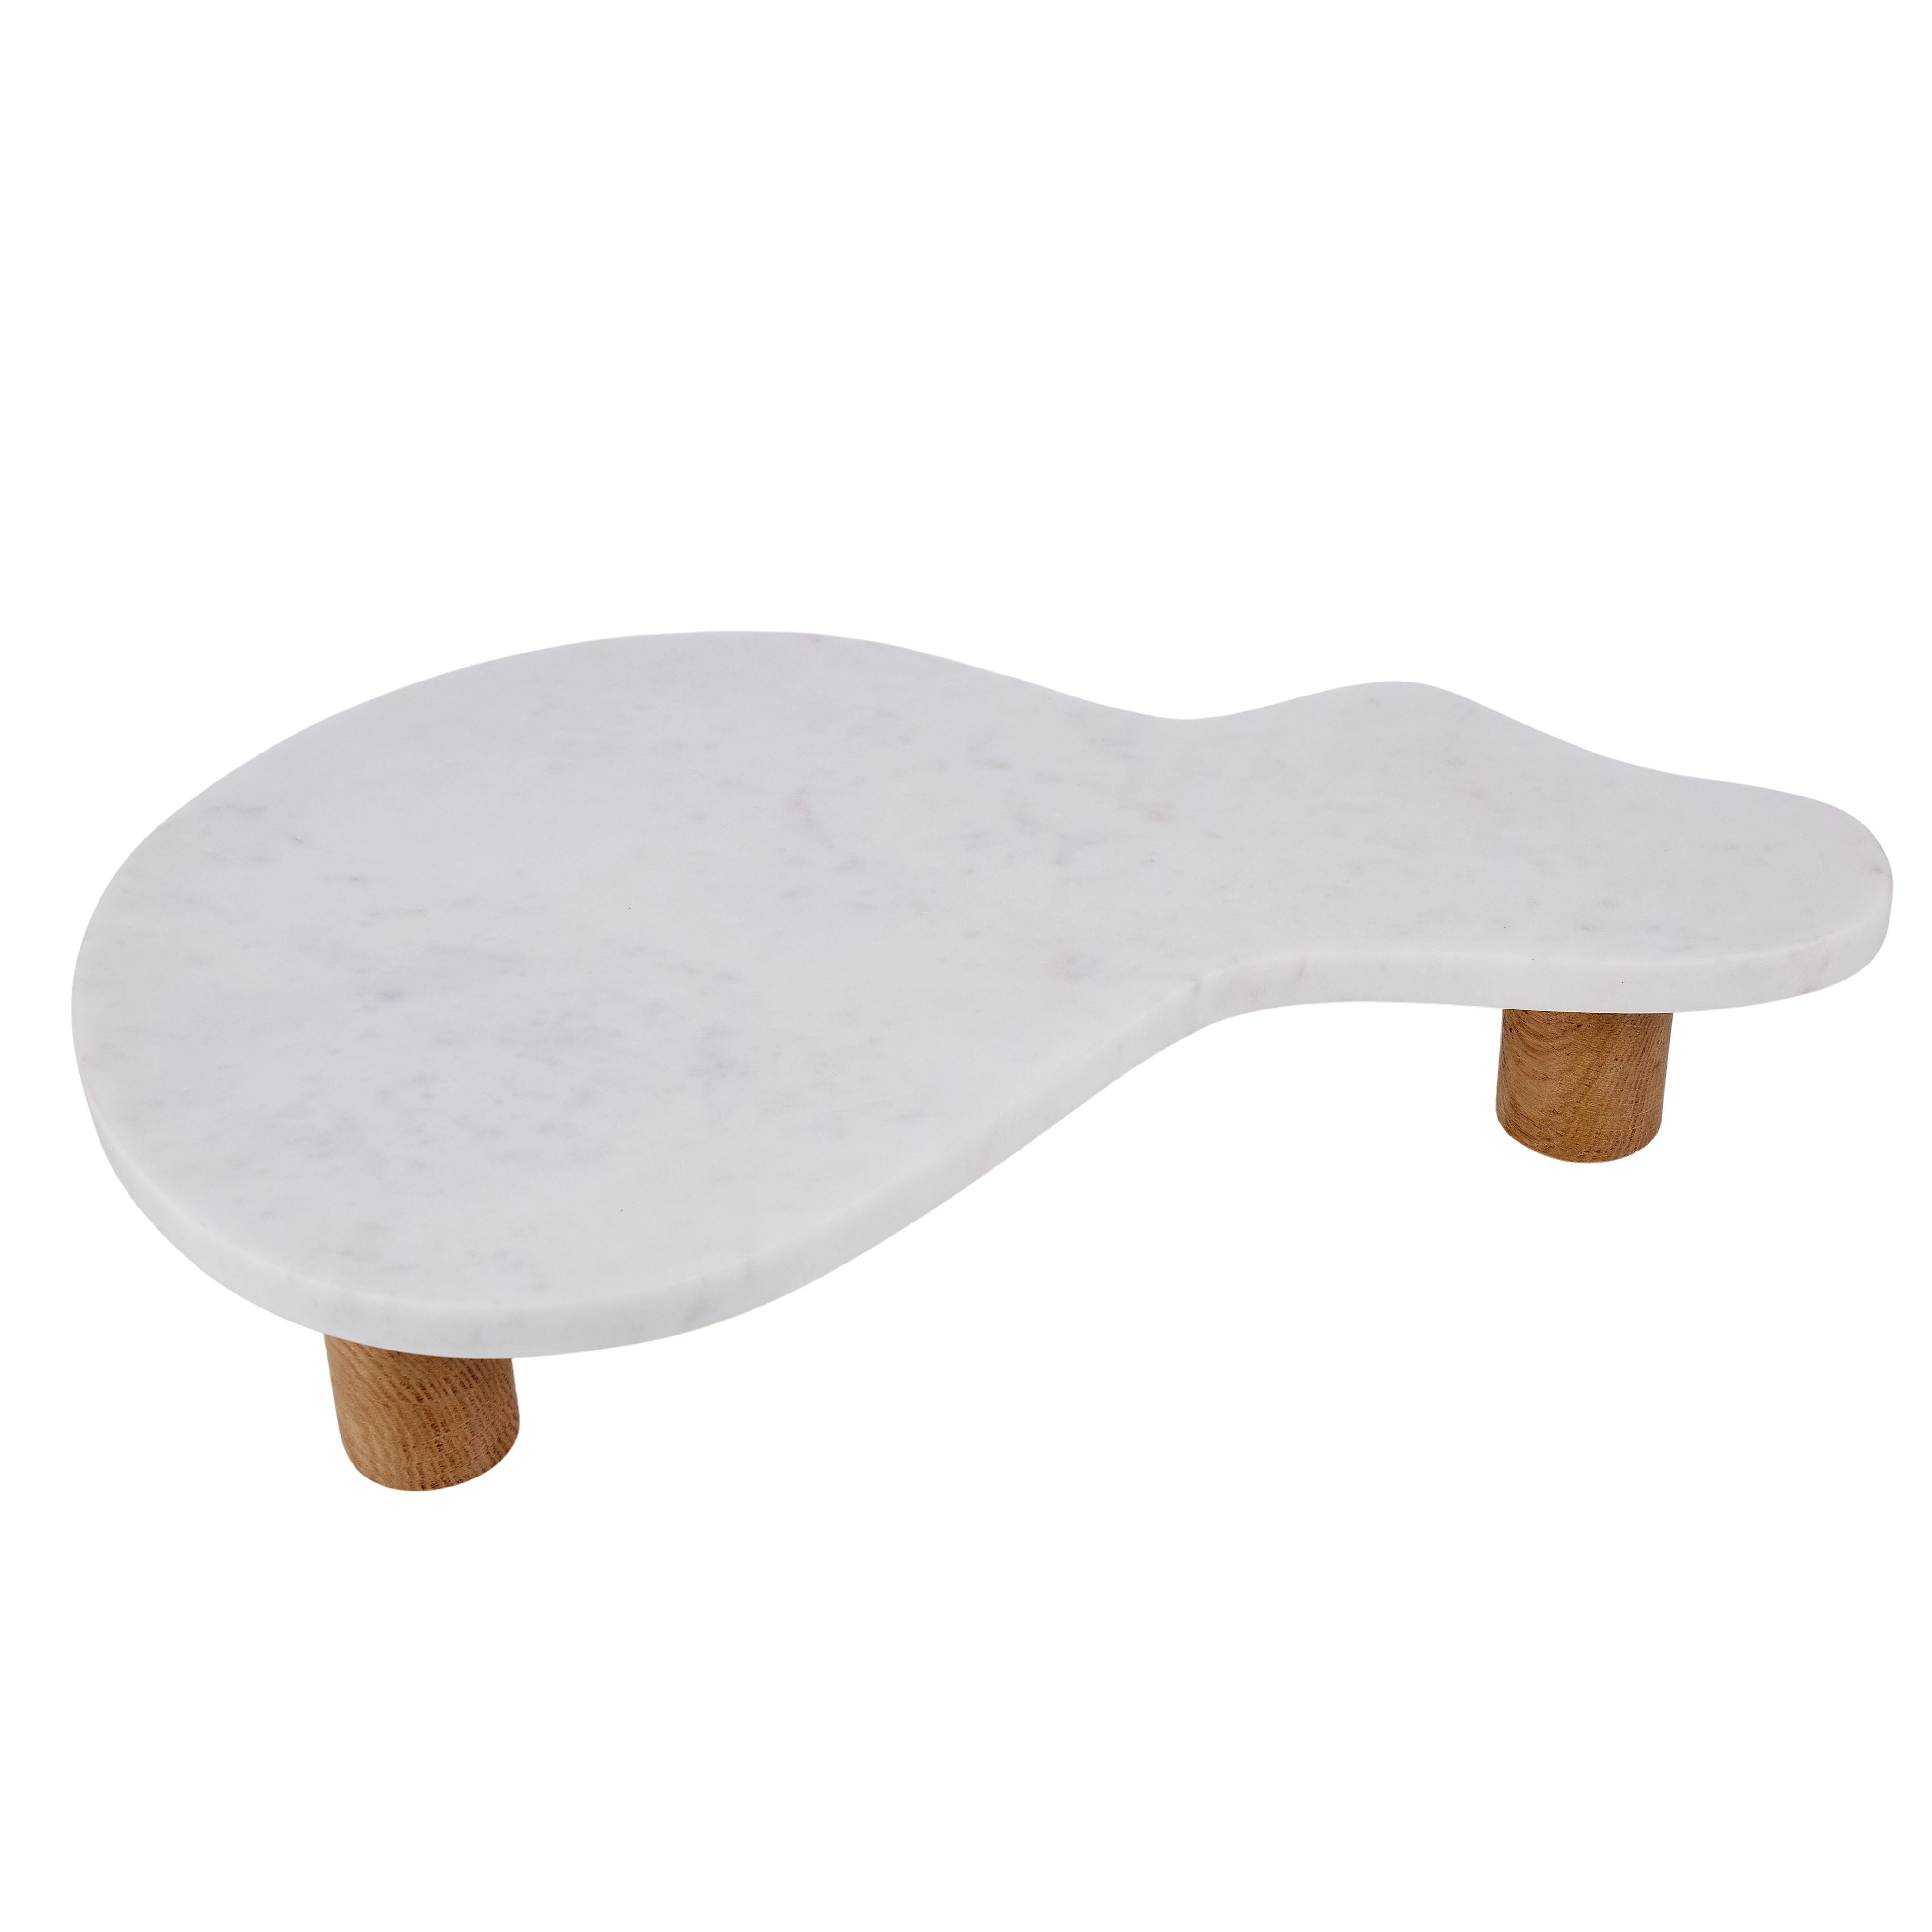 Puddle Marble & Wood Footed Serving Board-Dining & Entertaining-Amalfi-The Bay Room